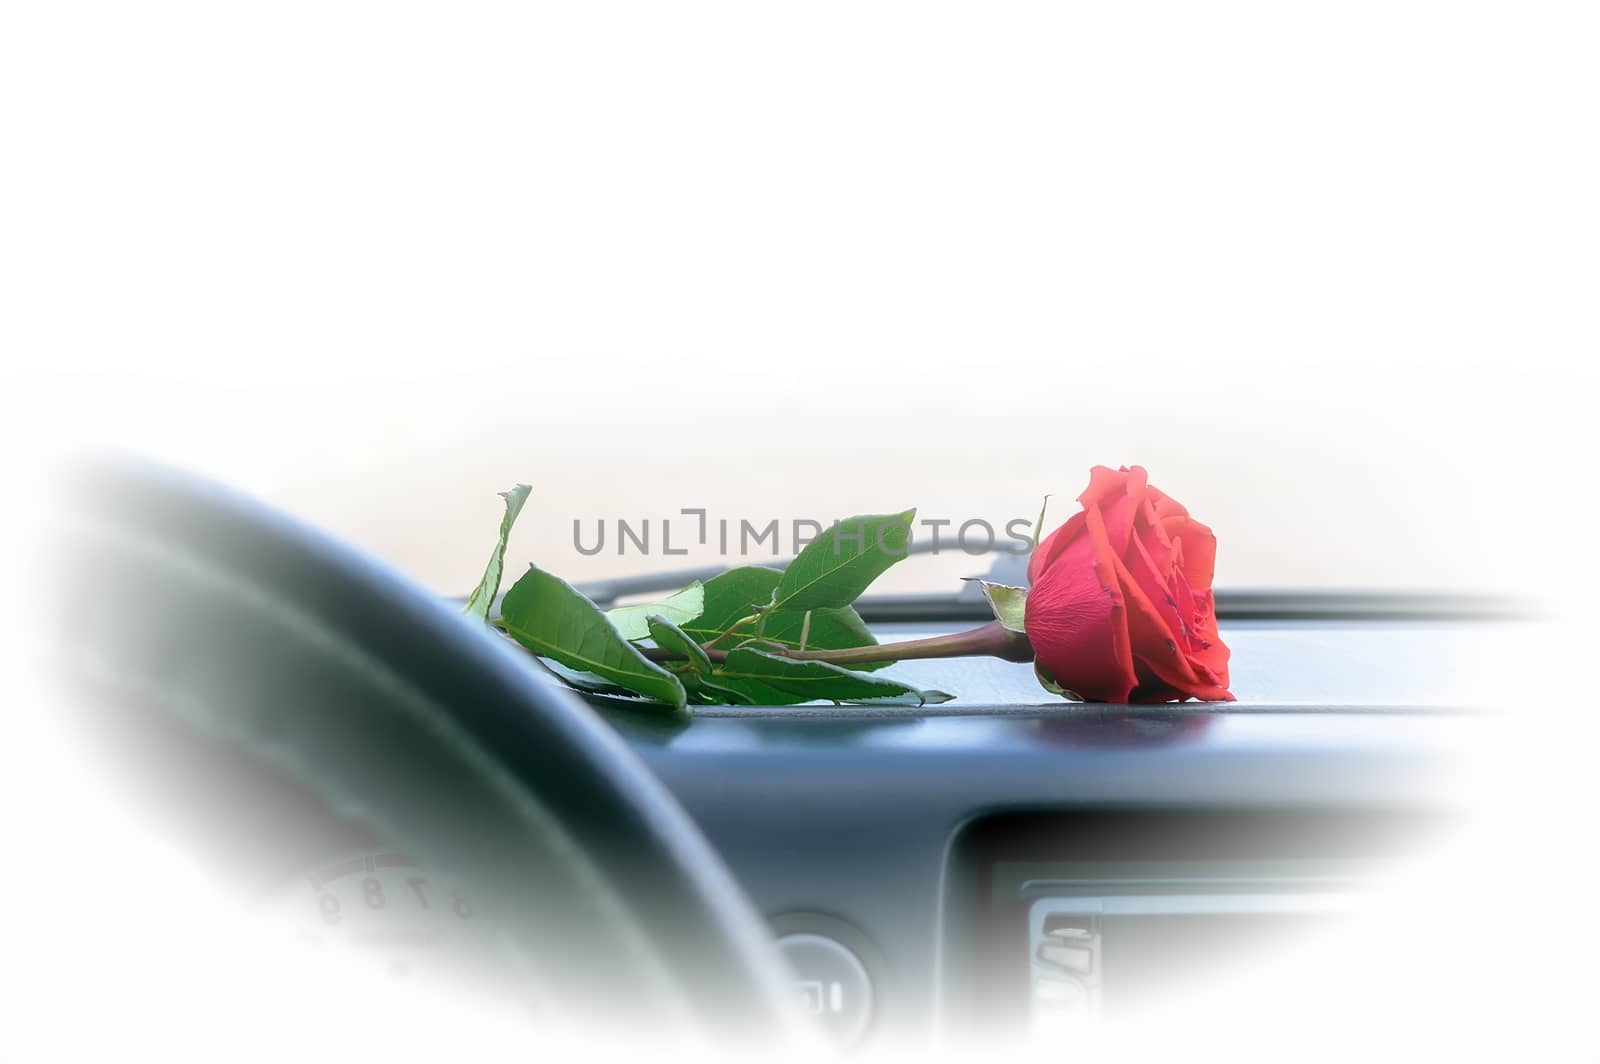 a red rose flower lies on the dashboard inside the car